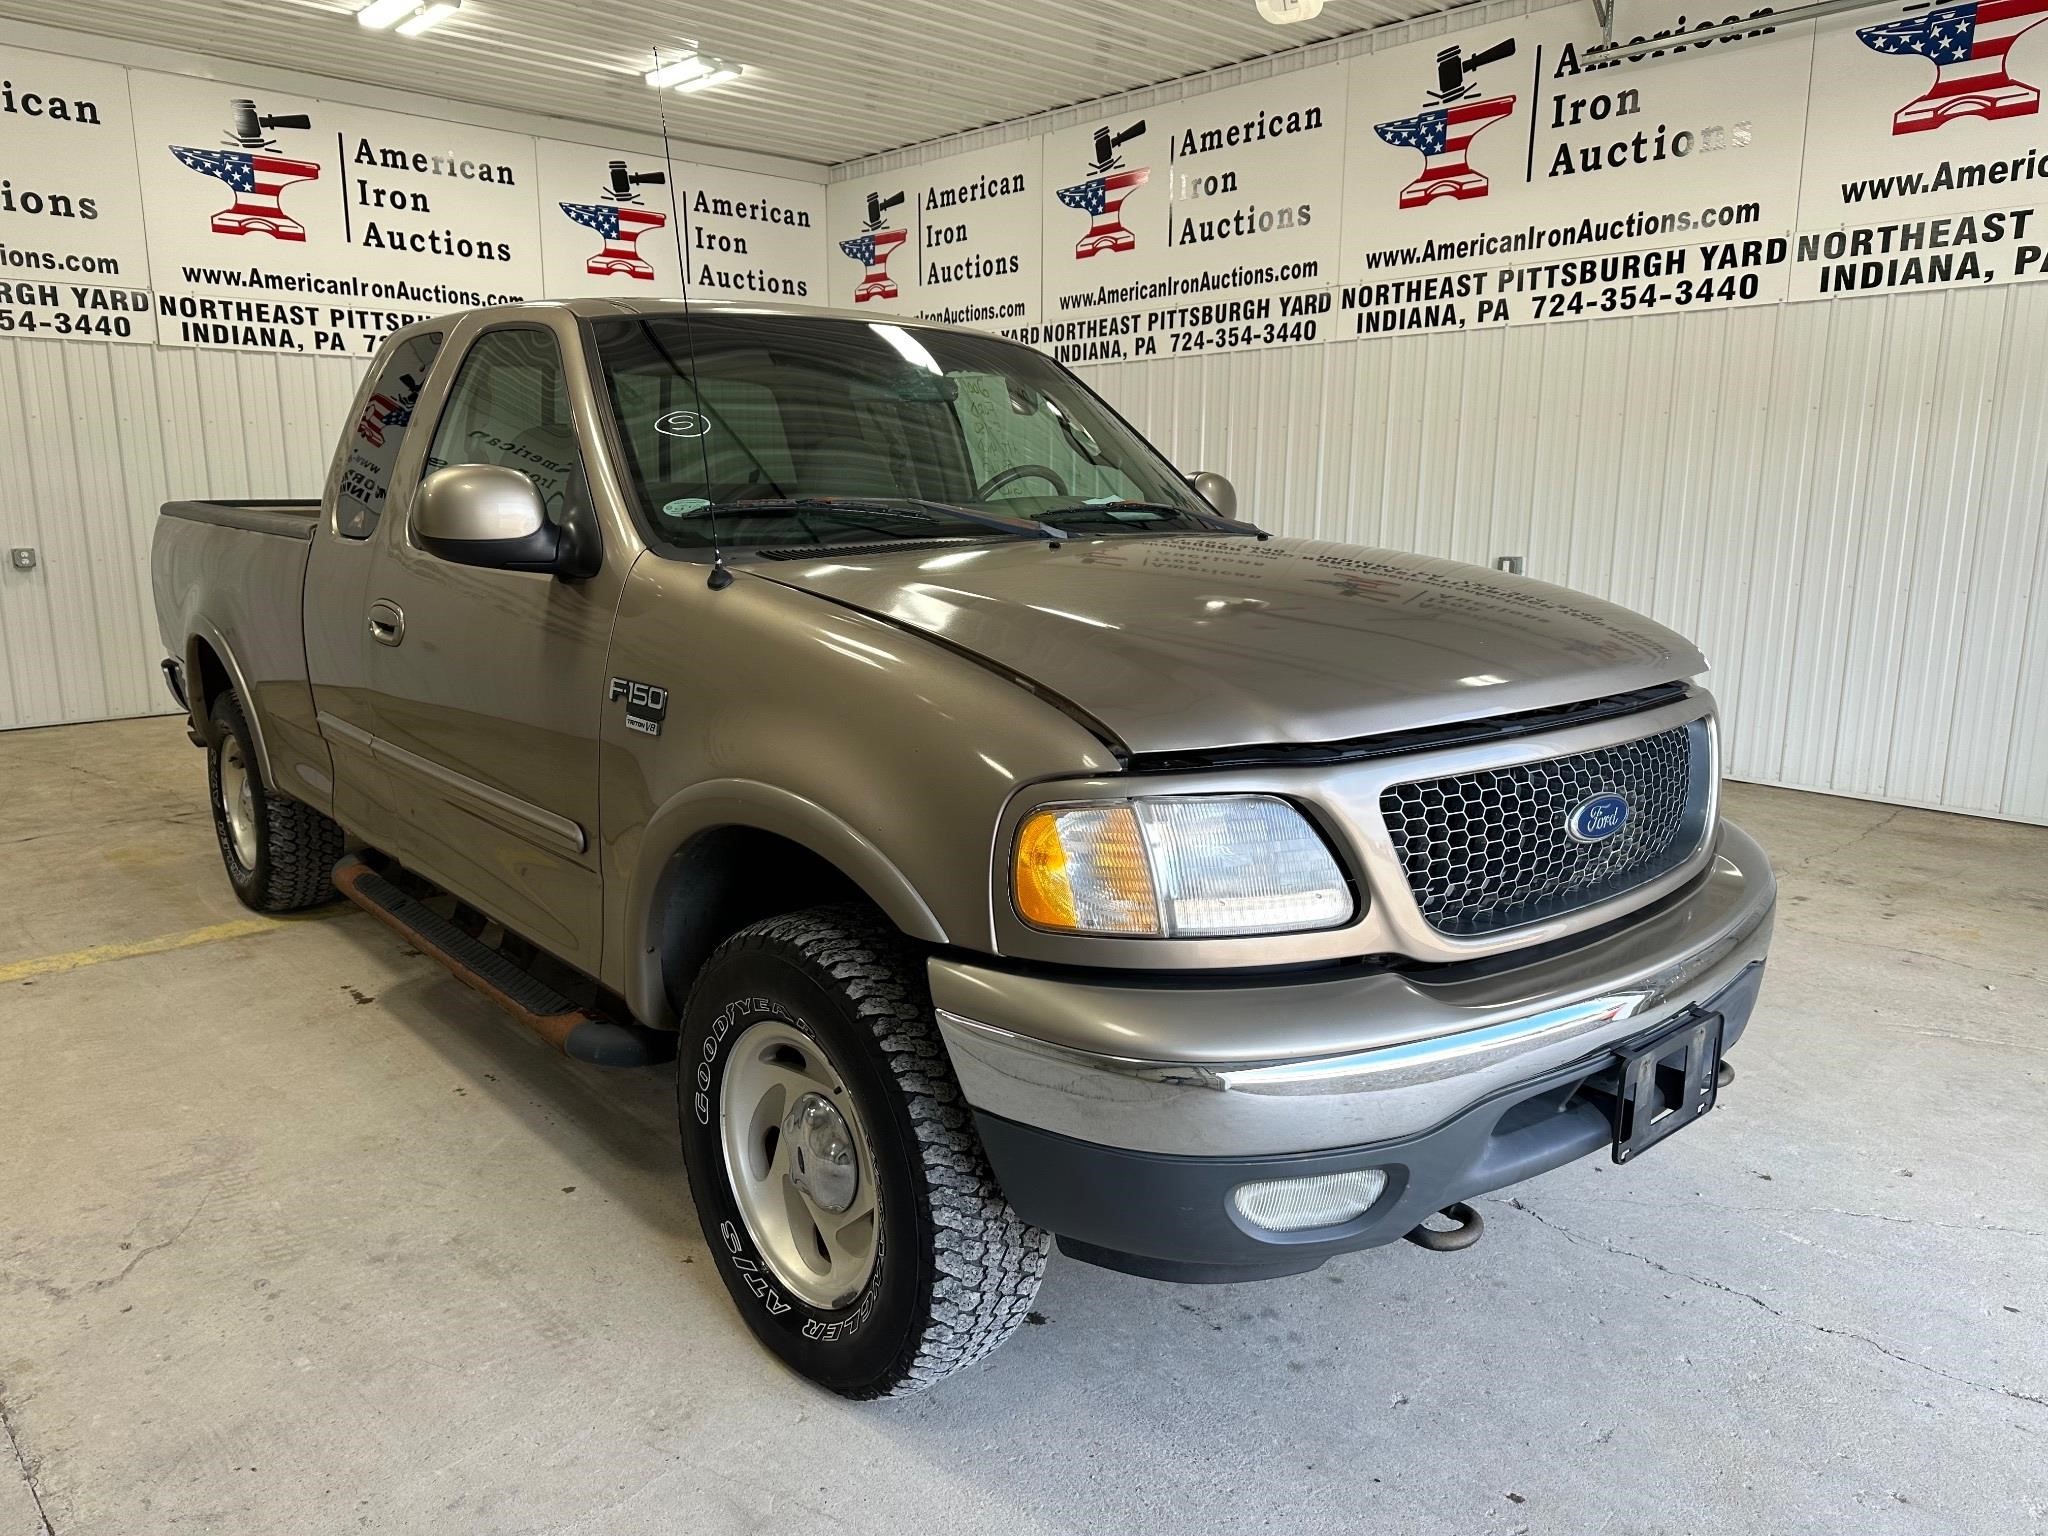 2001 Ford F150 Truck-Titled